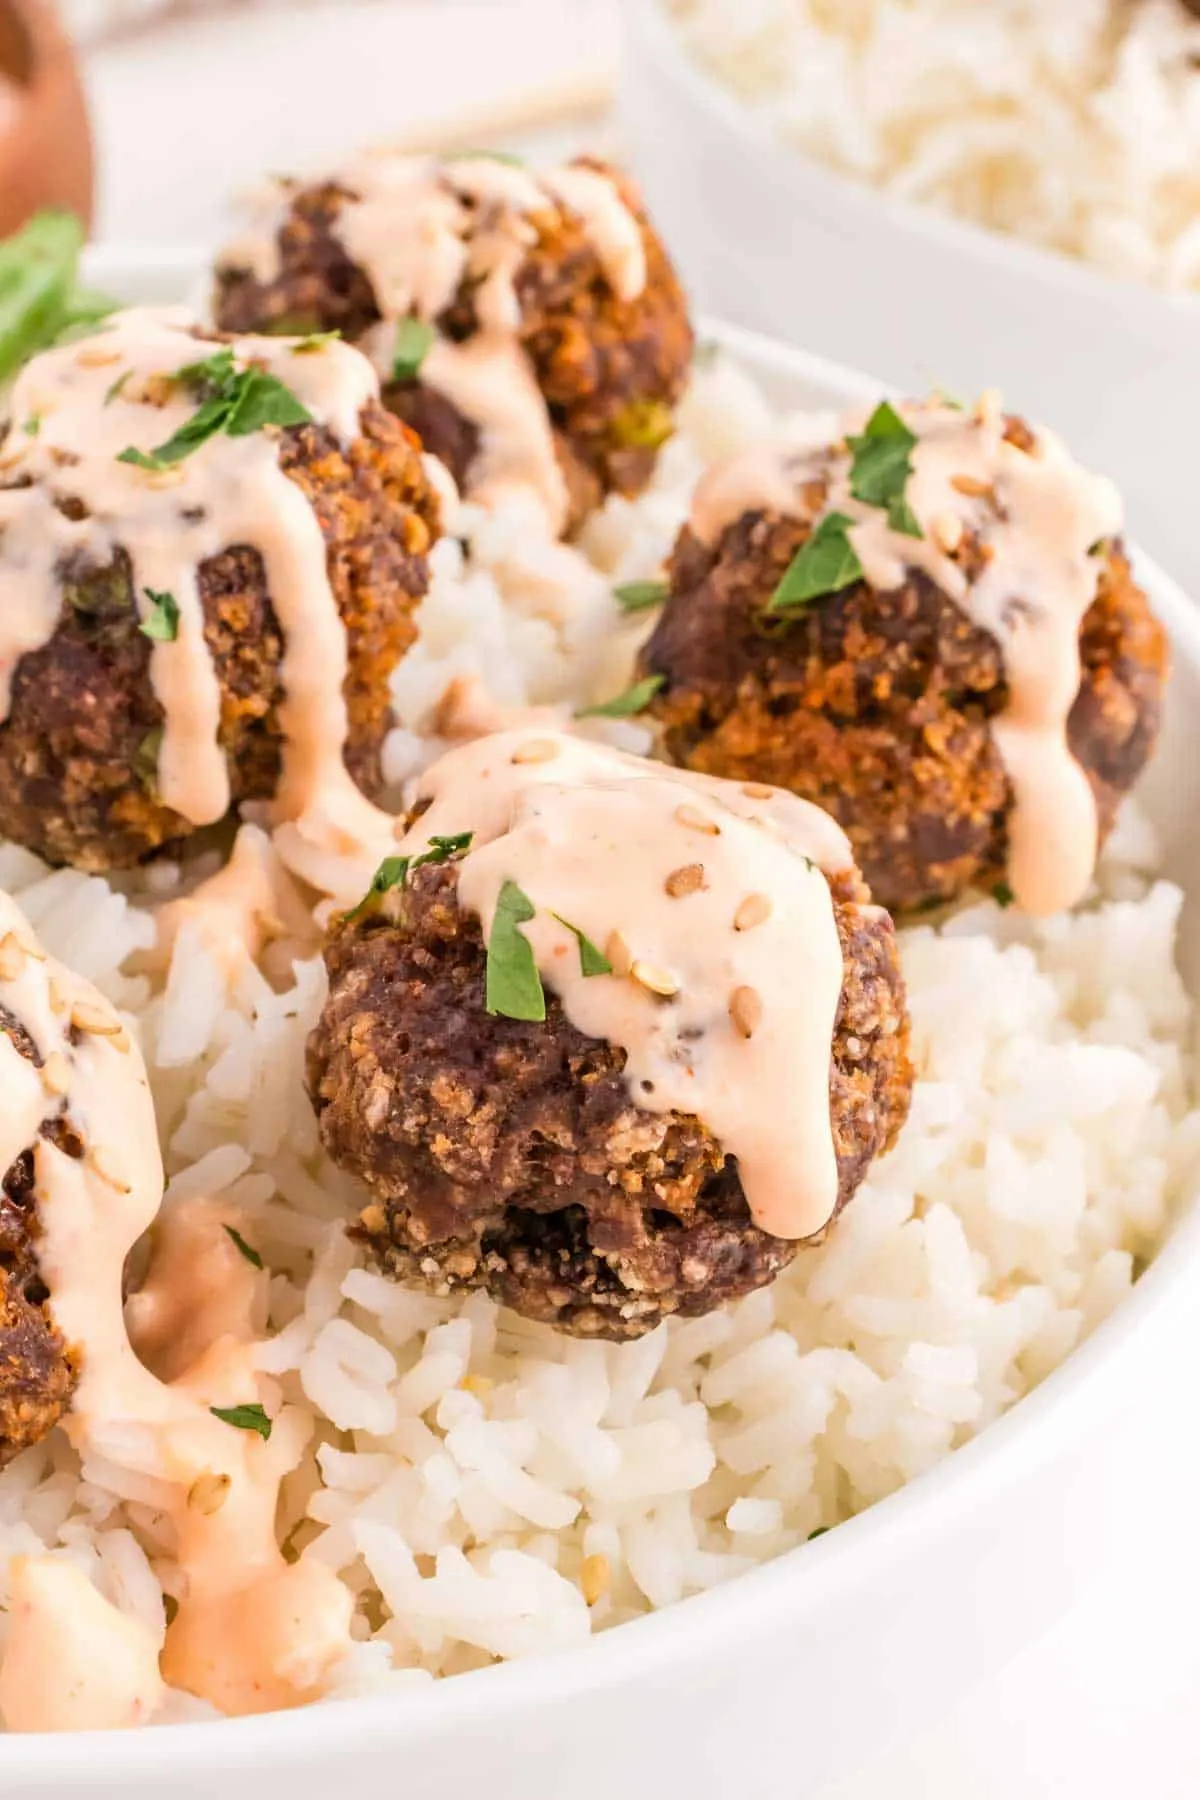 Firecracker Meatballs are flavourful homemade ground beef meatballs with a bit of a kick from siracha sauce and red pepper flakes and topped with a sour cream and mayo based sauce.